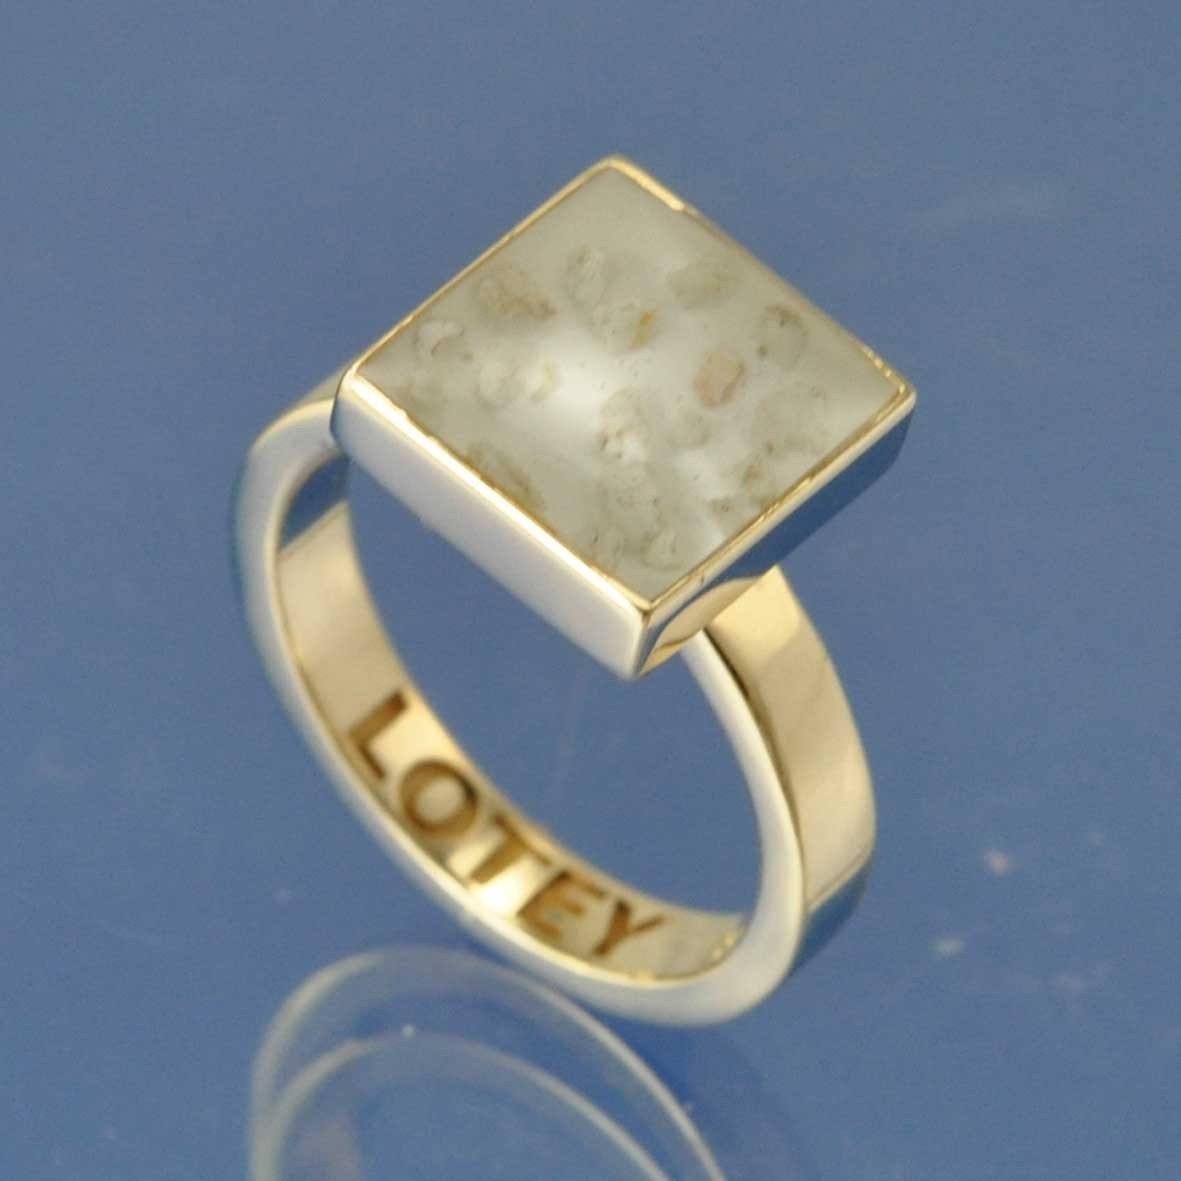 Cremation Ash Resin Square Ring Ring by Chris Parry Jewellery